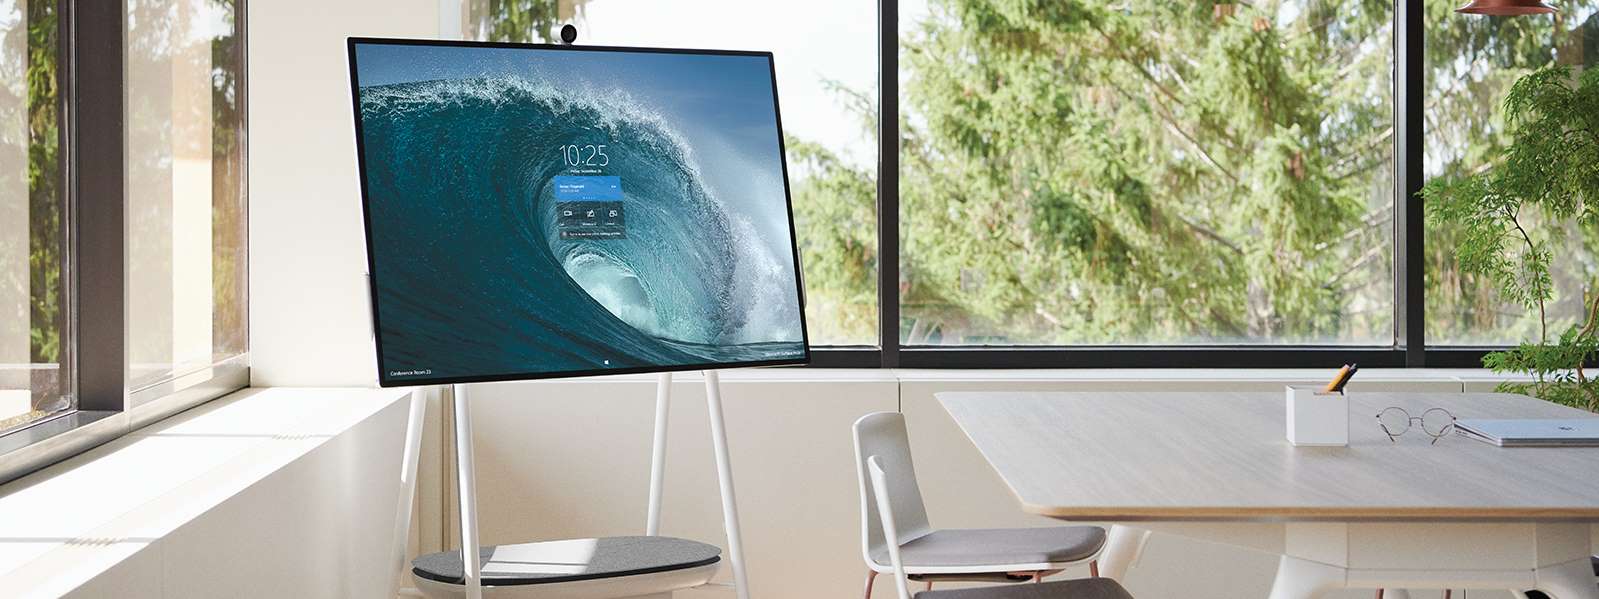 Microsoft’s giant 85-inch Surface Hub 2S will arrive in January 2021 for $21,999.99